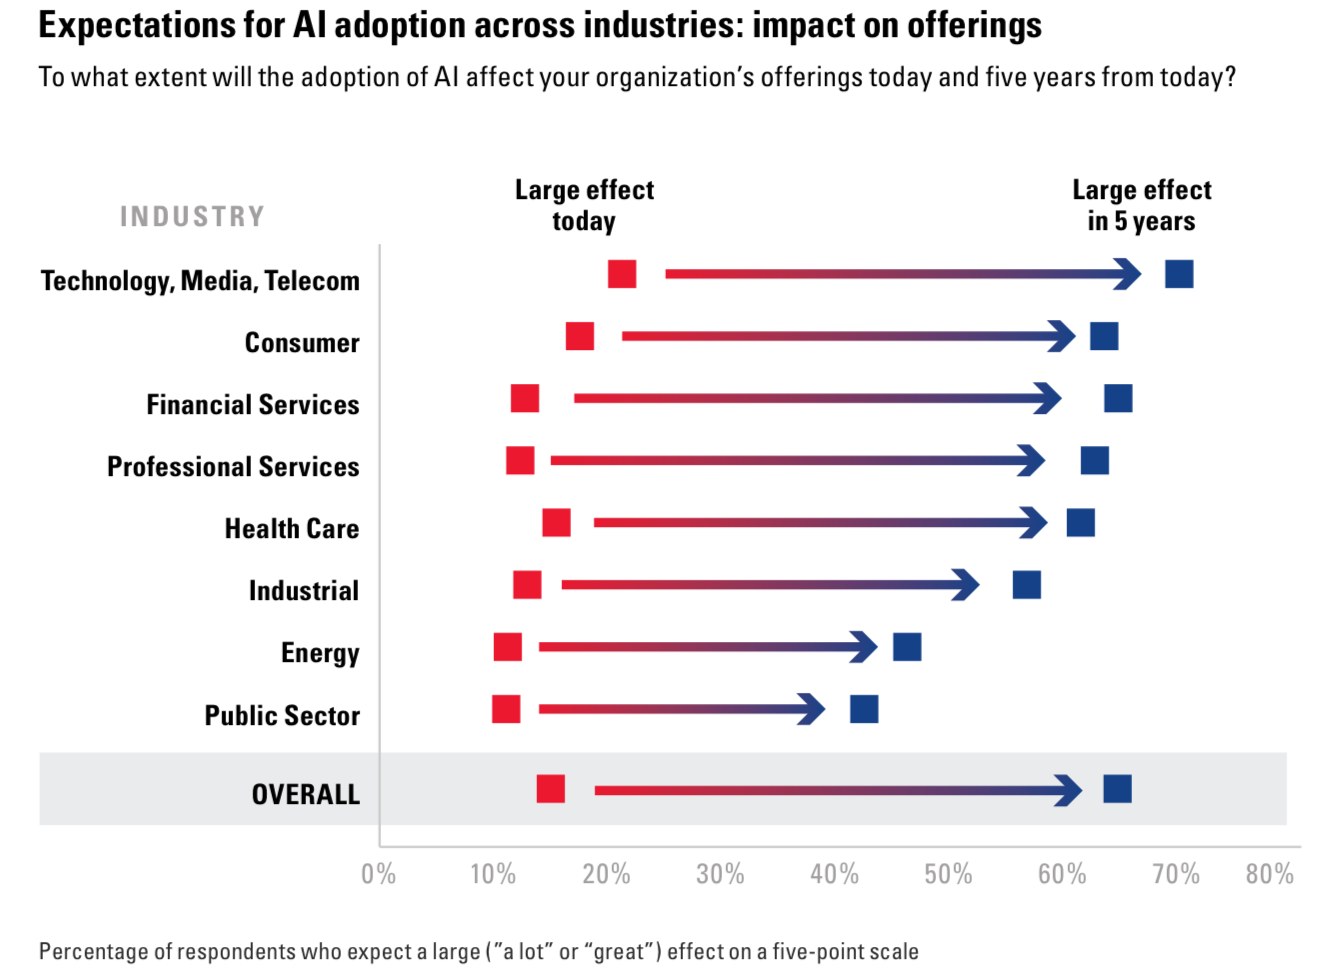 Figure 2: Expectations for AI adoption across industries: impact on offerings (BCG & MIT 2017)